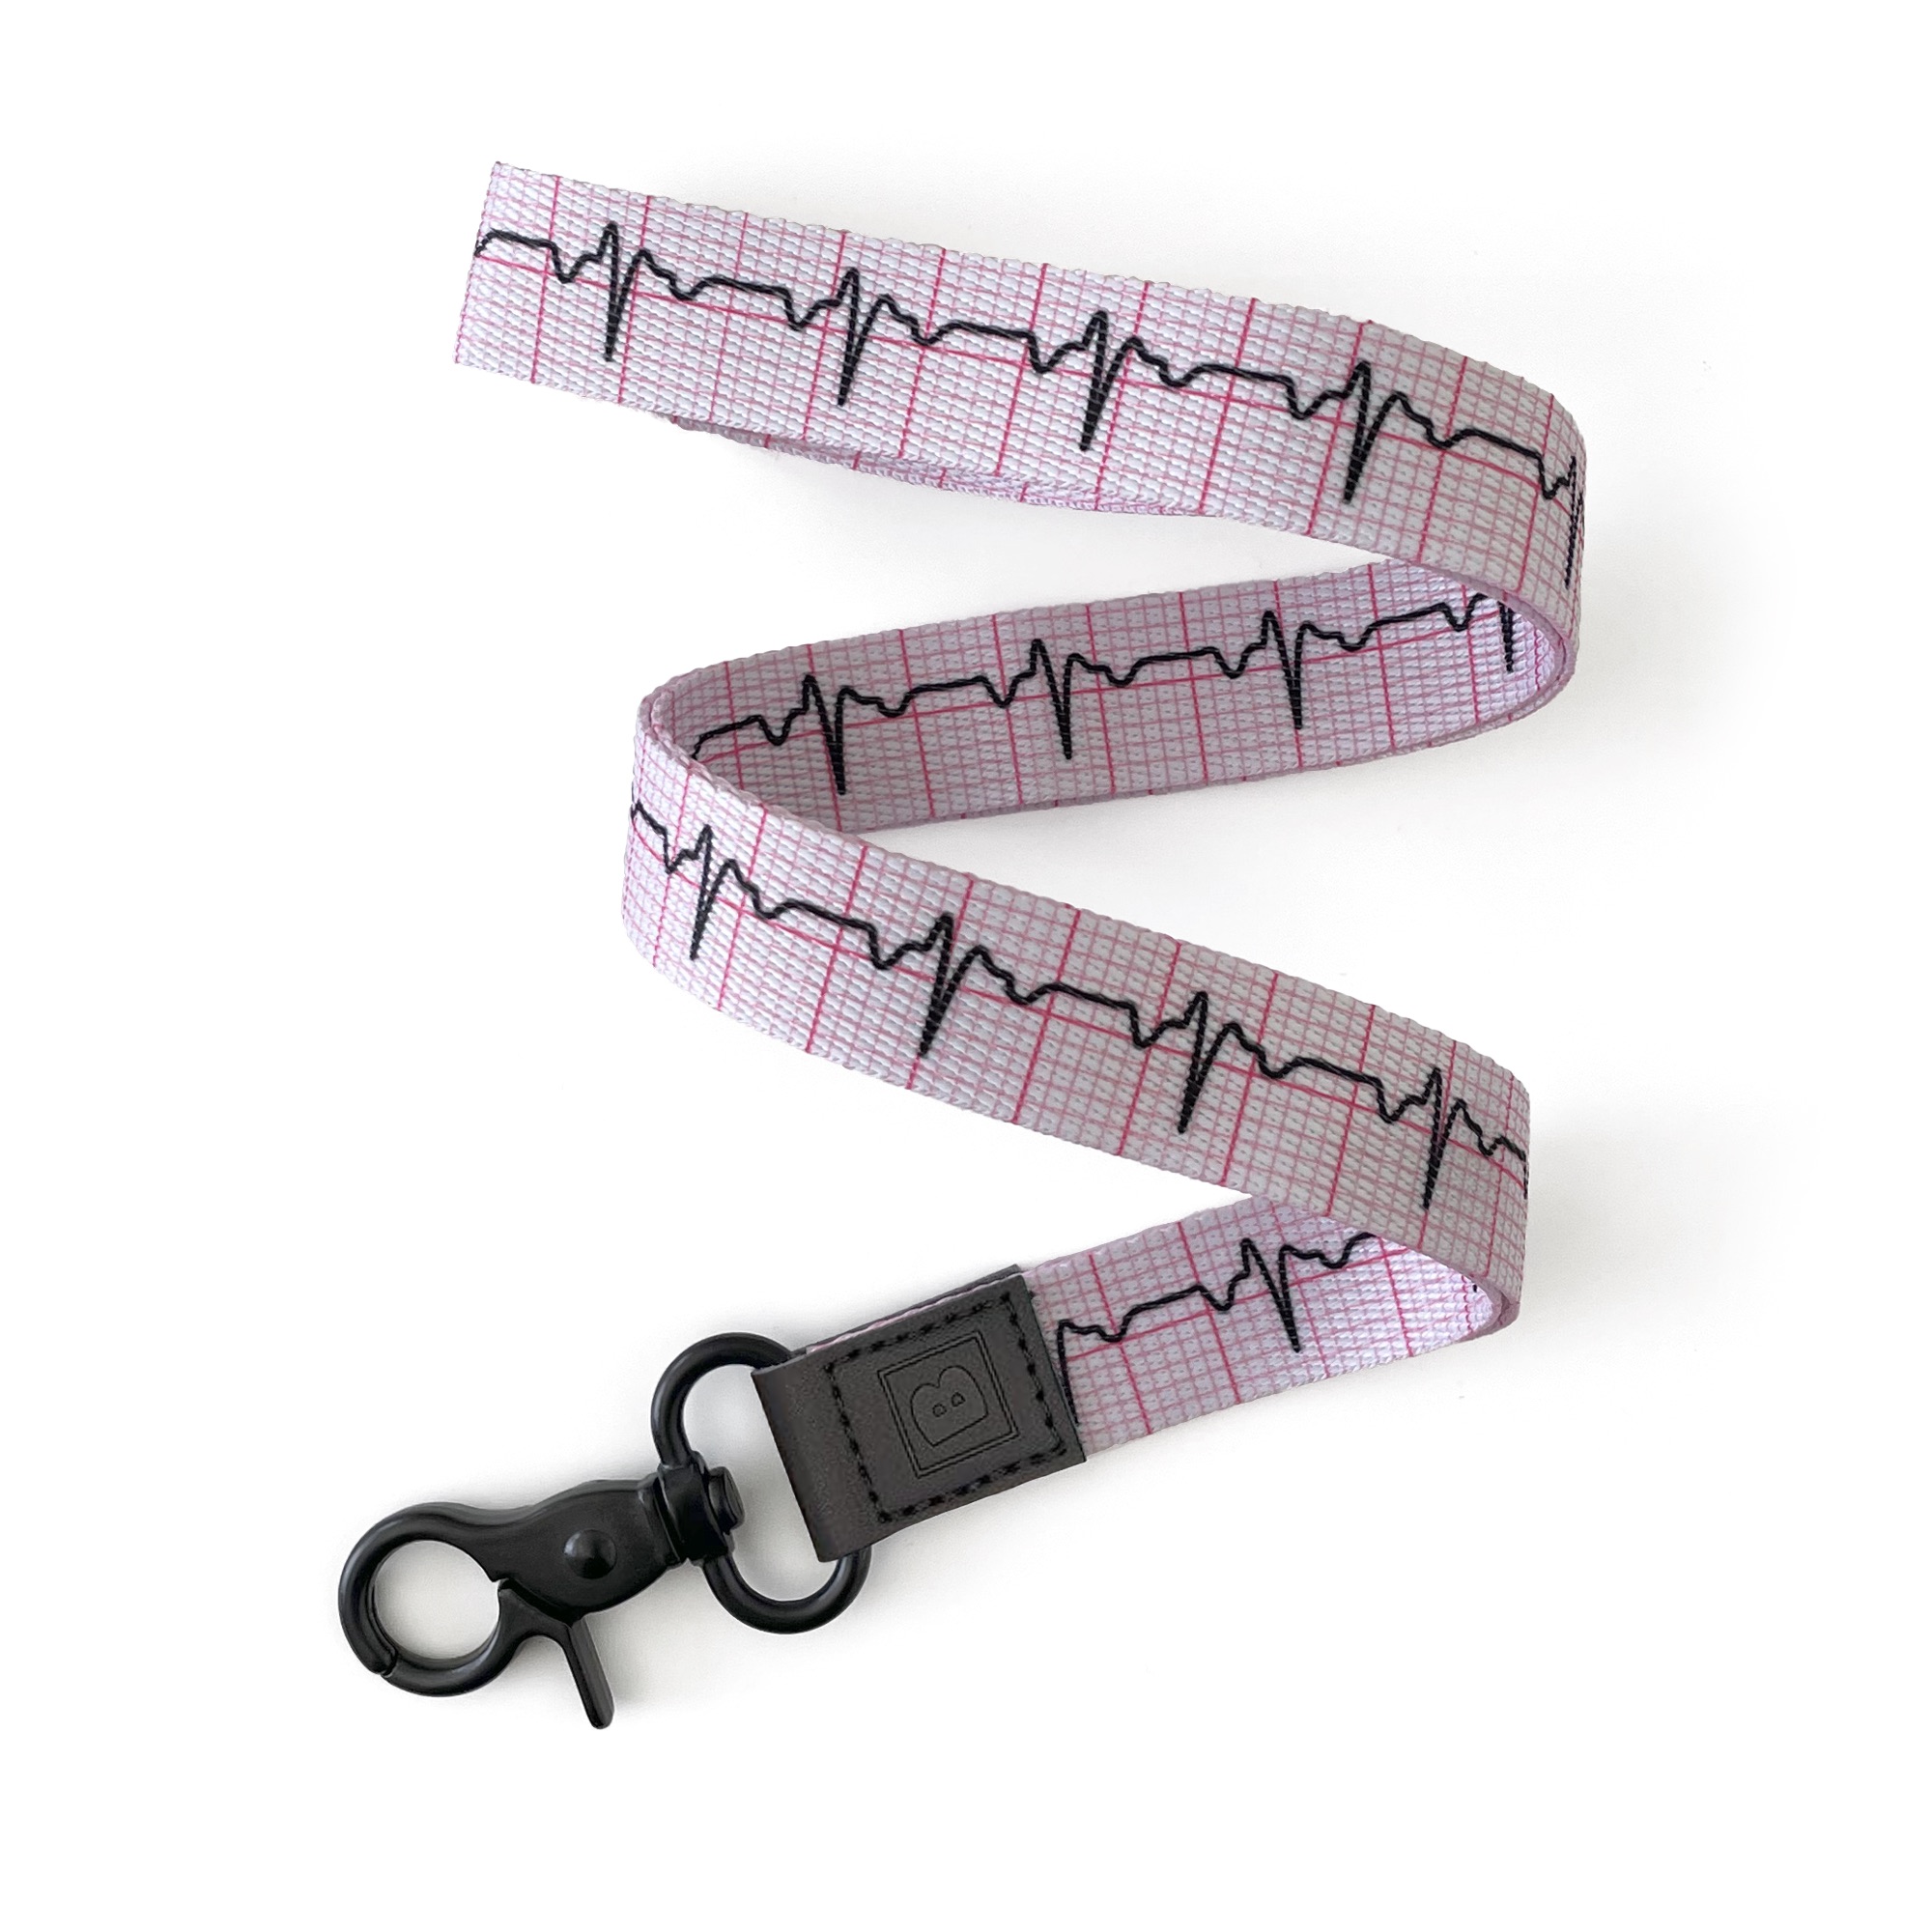 Heartbeat Harmony: Lanyard with EKG Strip Design – Wear Your Love for Cardiology! by BadgeZoo